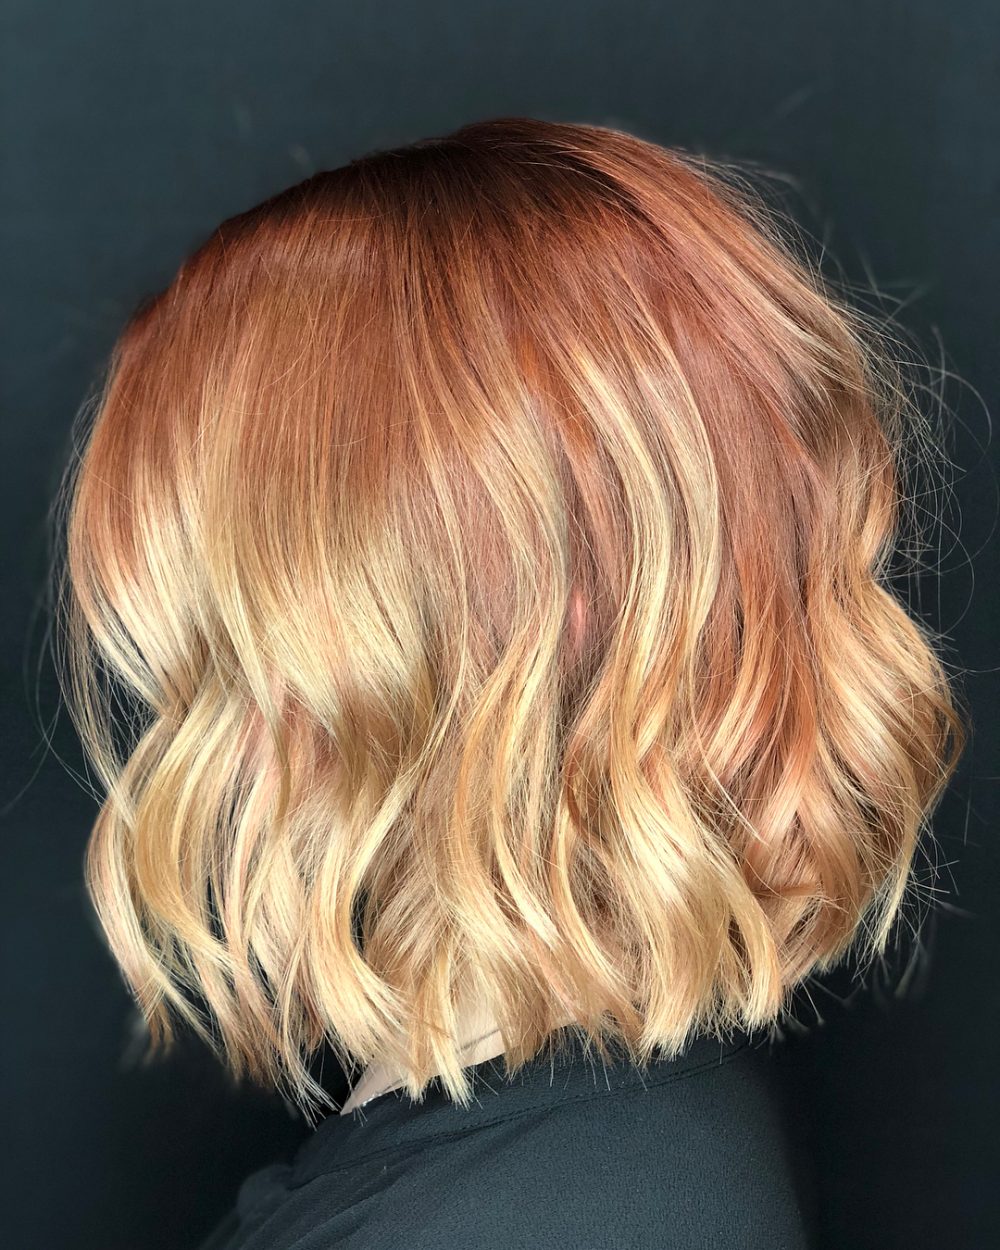 Strawberry Blonde Hair Ombre.